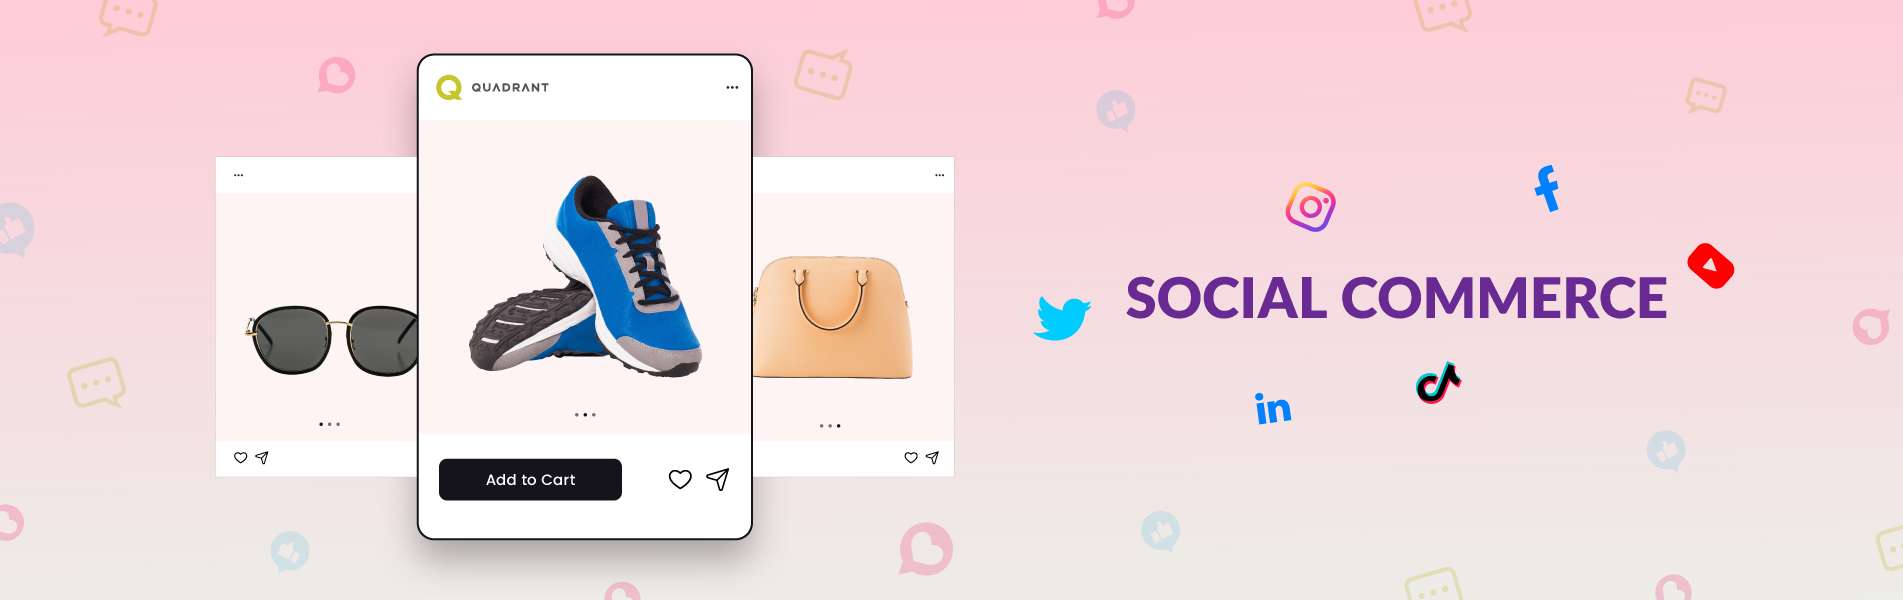 social commerce for small businesses